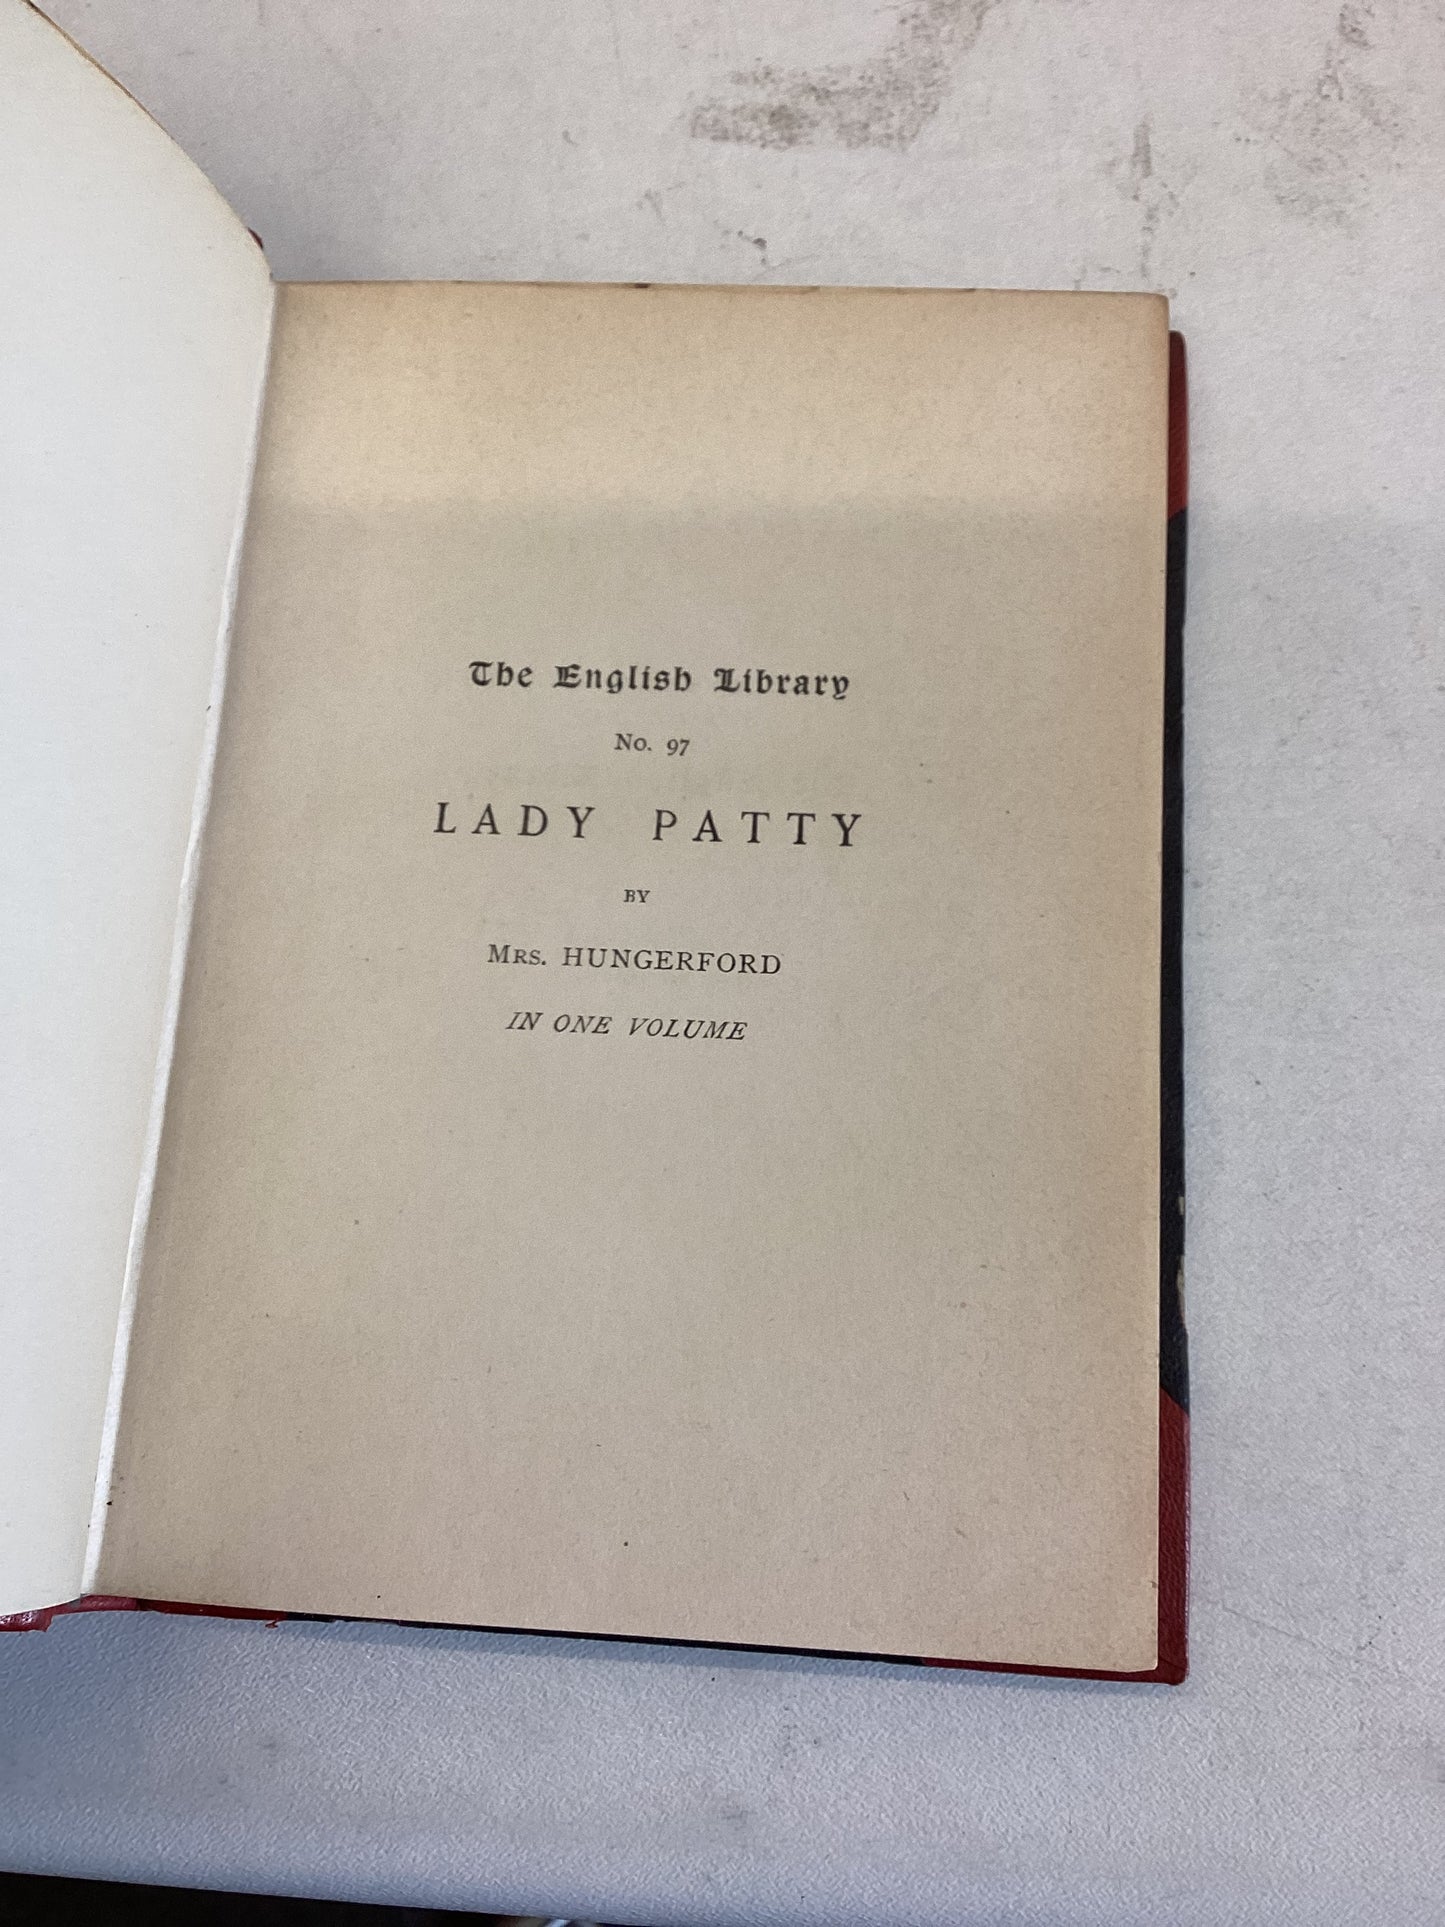 Lady Patty A Sketch by Mrs Hungerford